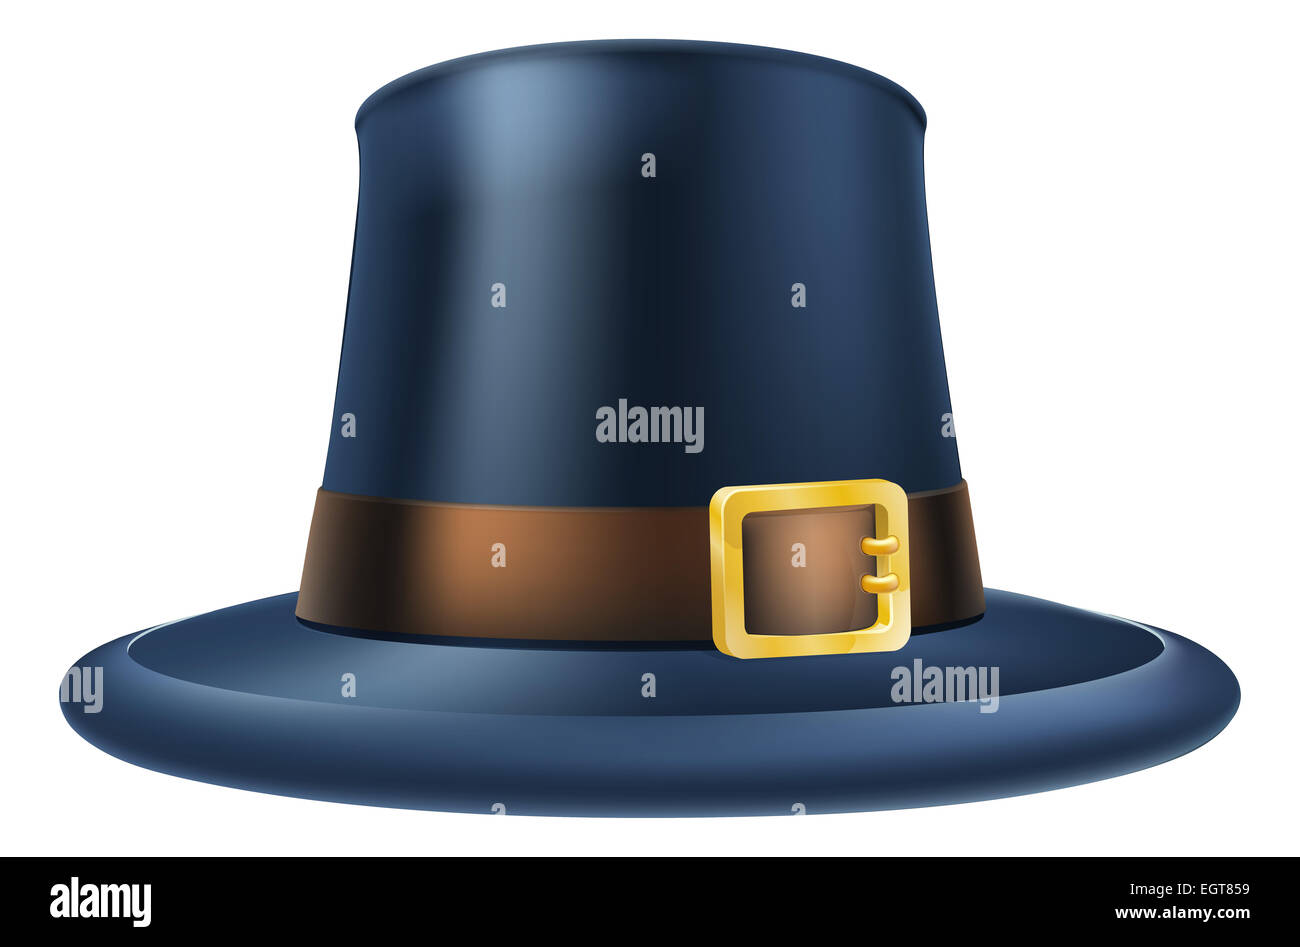 An illustration of a capatain thanksgiving pilgrim puritan hat Stock Photo